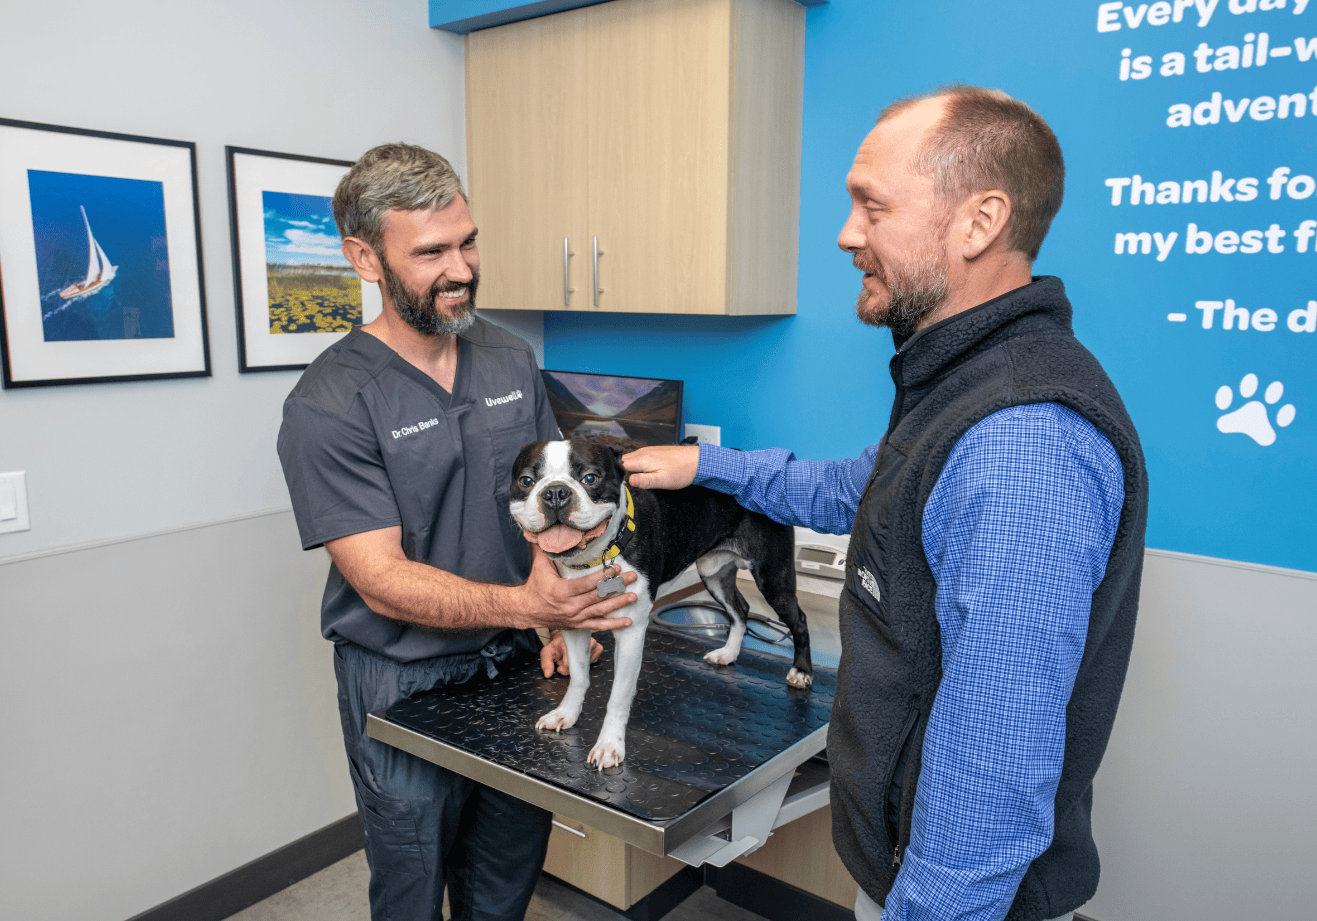 Dr. Chris Banks visiting with pet and pet owner in office